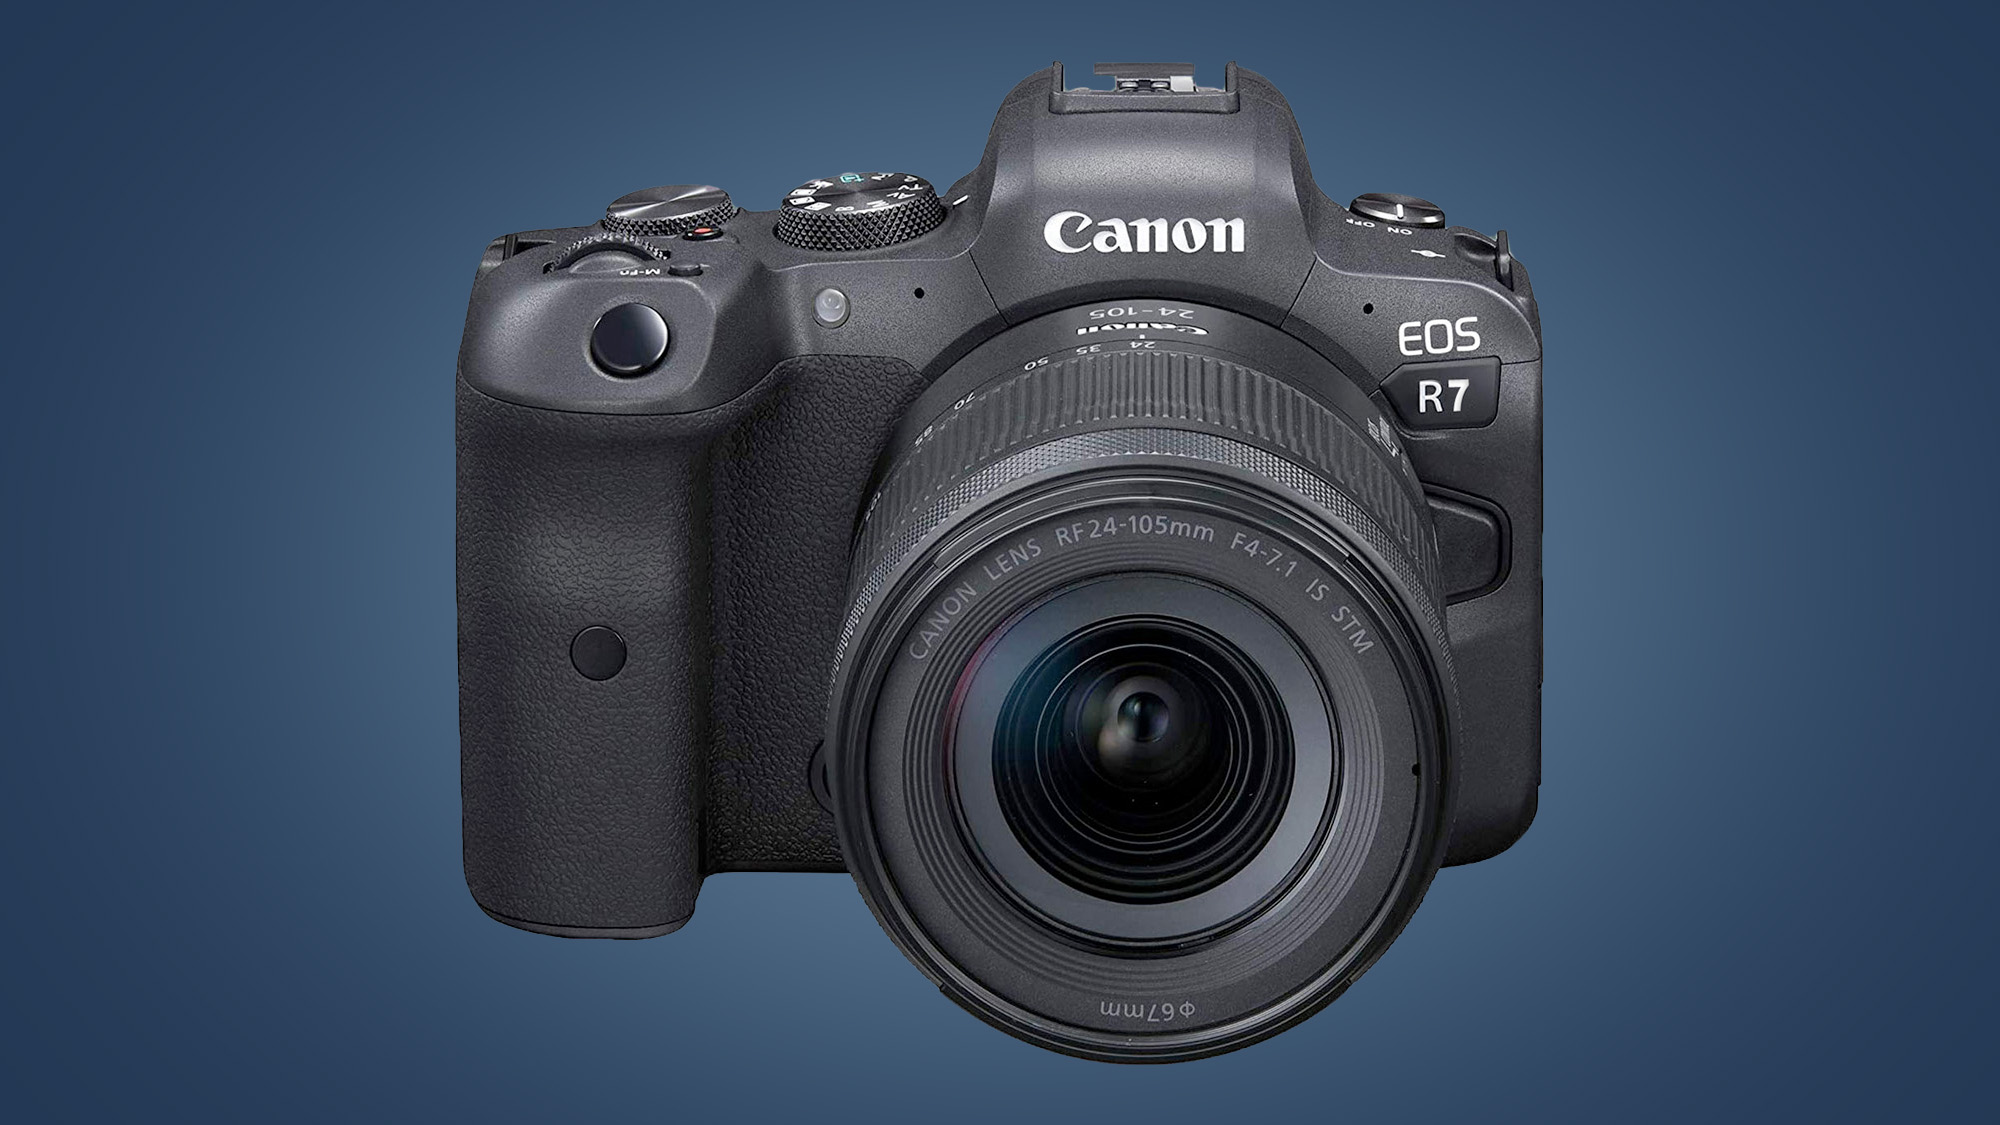 The Canon EOS R5 camera on a blue background